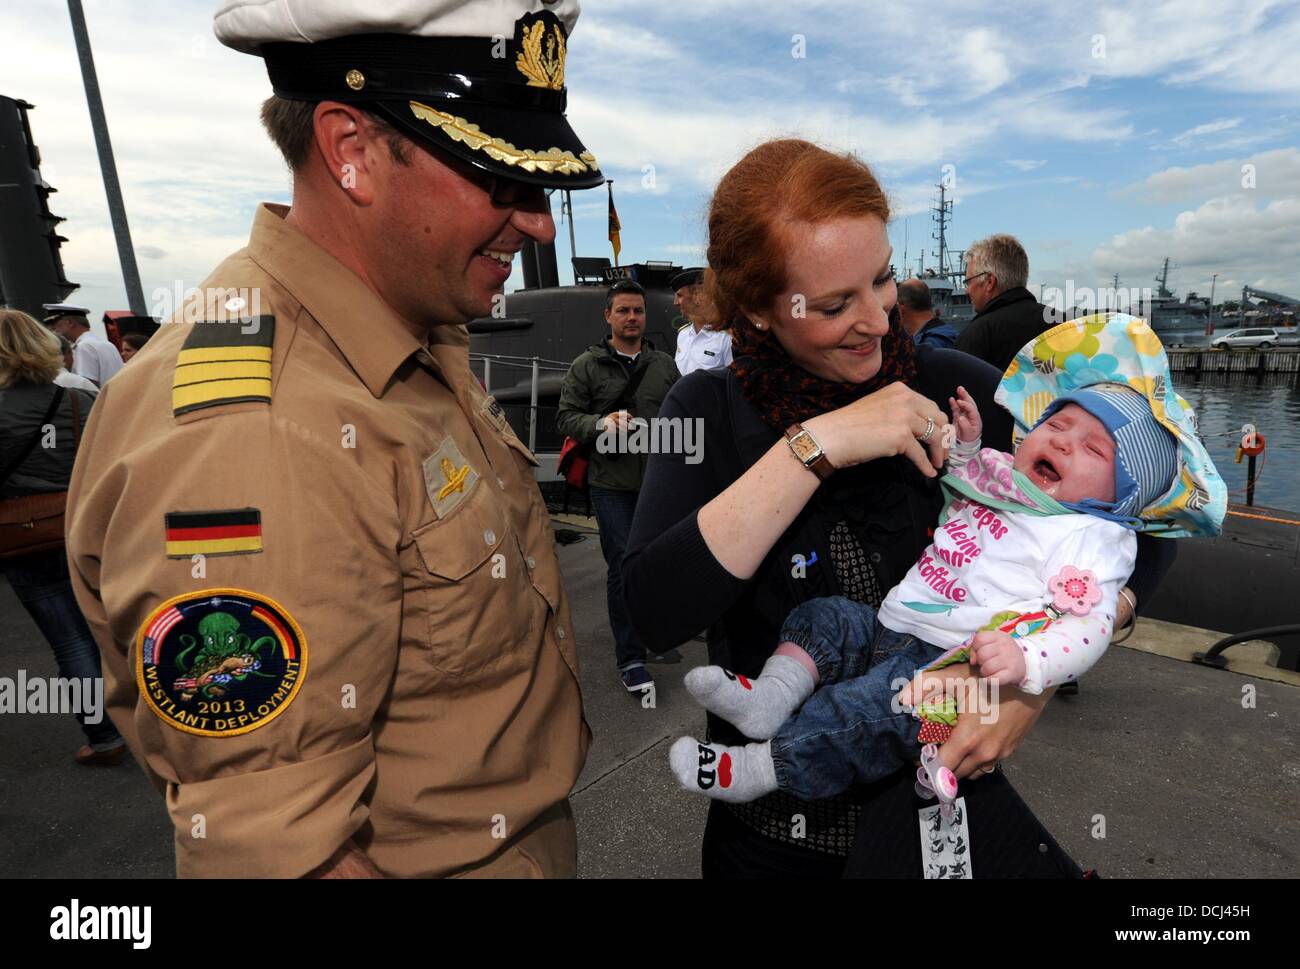 the Baltic Sea Naval Base Eckernfoerde, Germany. 19th Aug, 2013. Commander of the German submarine U32 Christian Michalski is welcomed by girlfriend Vanessa Friese and daughter Charlotte as the submarine has returned to the Baltic Sea Naval Base Eckernfoerde, Germany, 19 August 2013. During the six-month trip the U32 submarine set a diving record by being under water for 18 days. Photo: CARSTEN REHDER/dpa/Alamy Live News Stock Photo